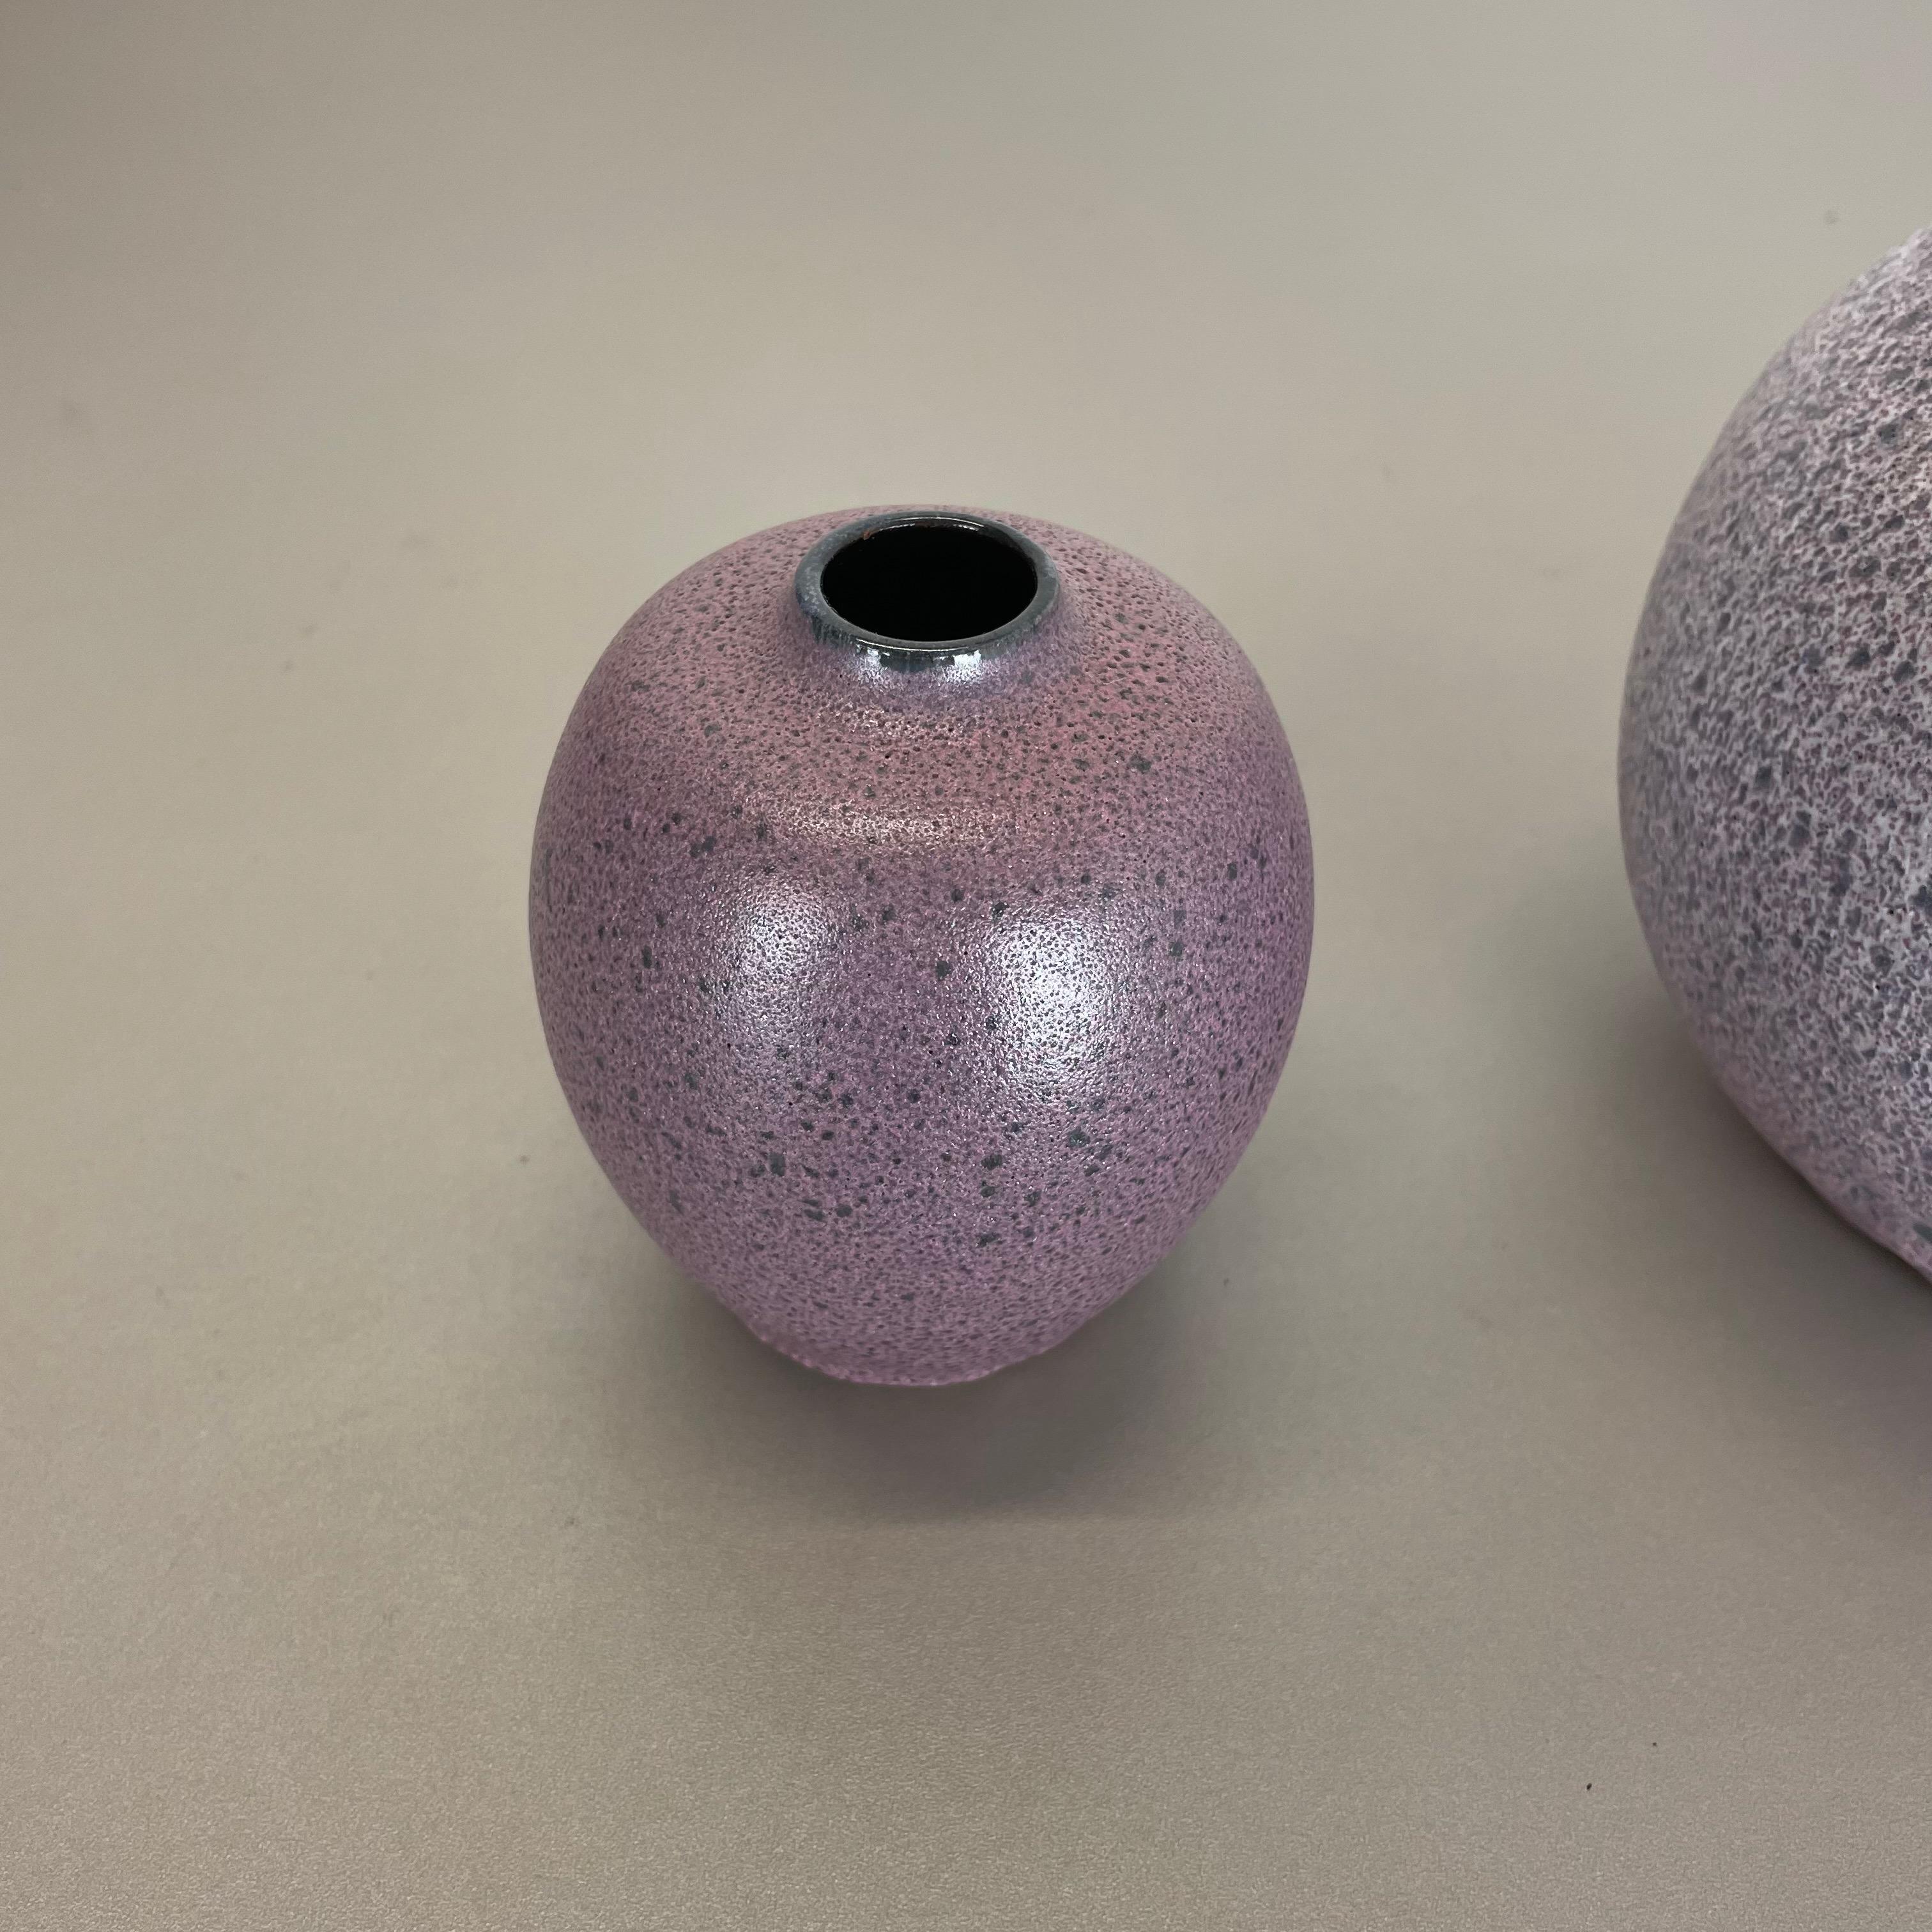 20th Century Set of 2 Pink Purple Ceramic Pottery Vase Objects by Römhild, GDR Germany 1970 For Sale